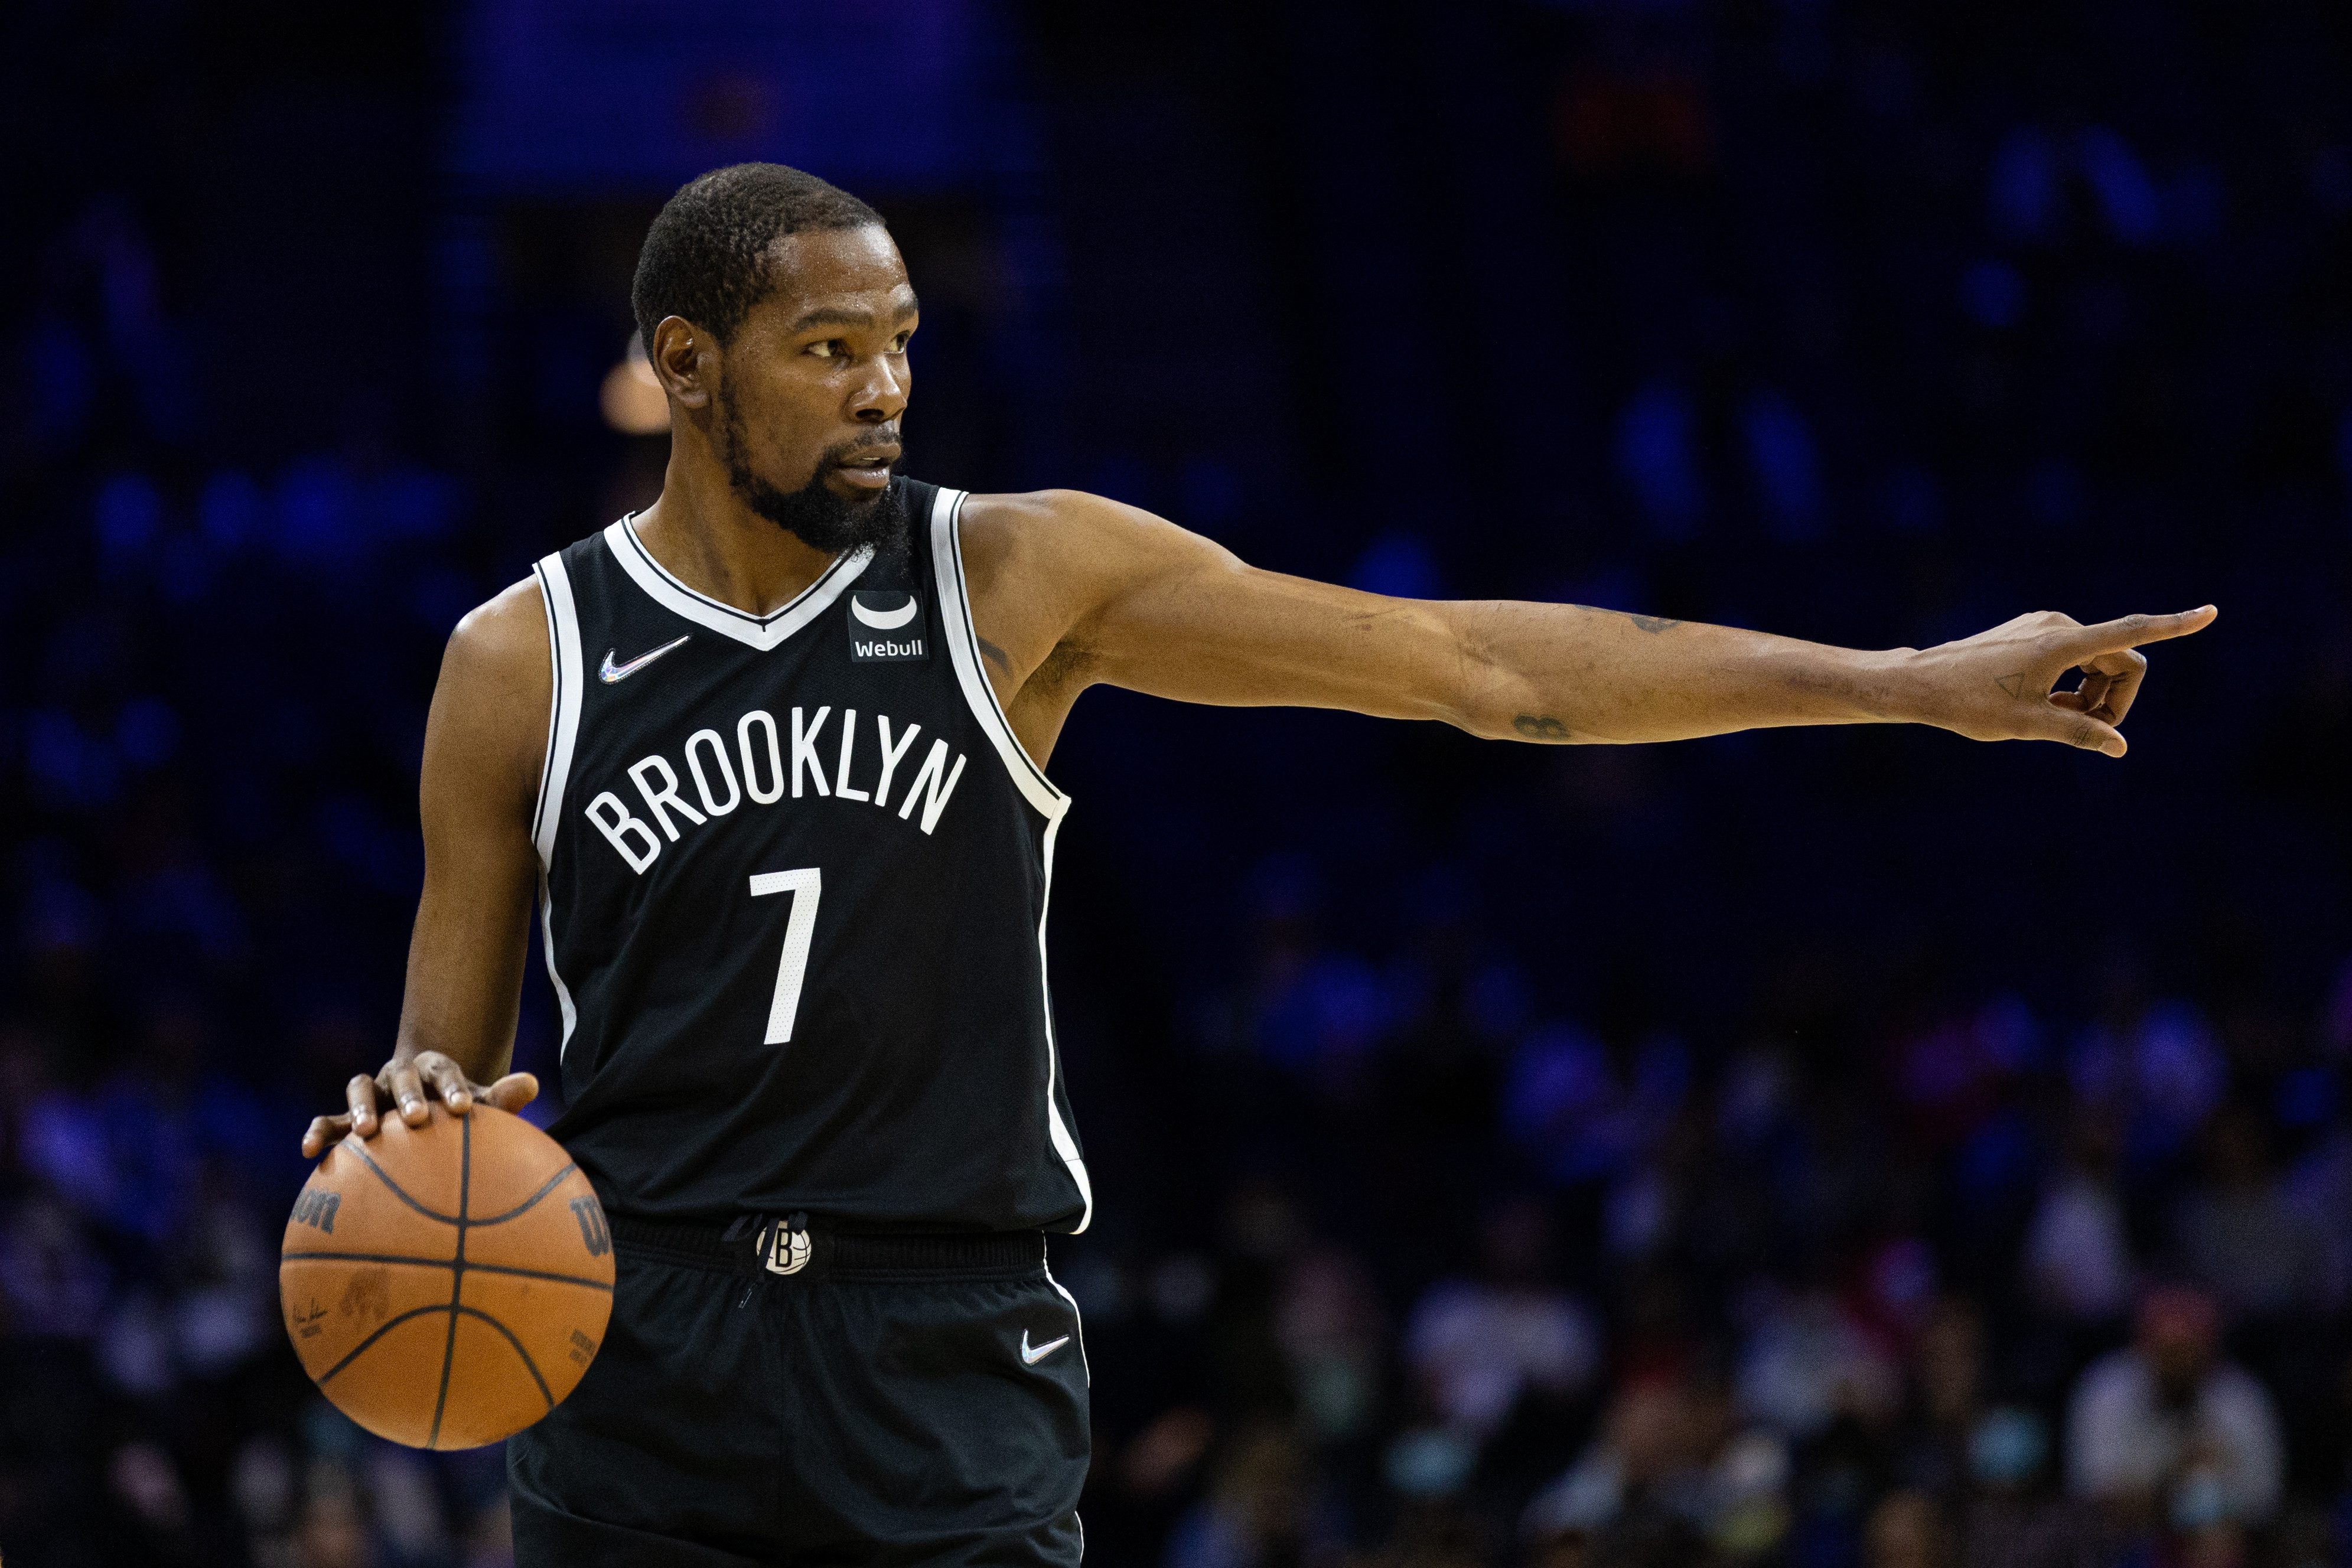 Kevin Durant agrees to remain with Nets following trade request